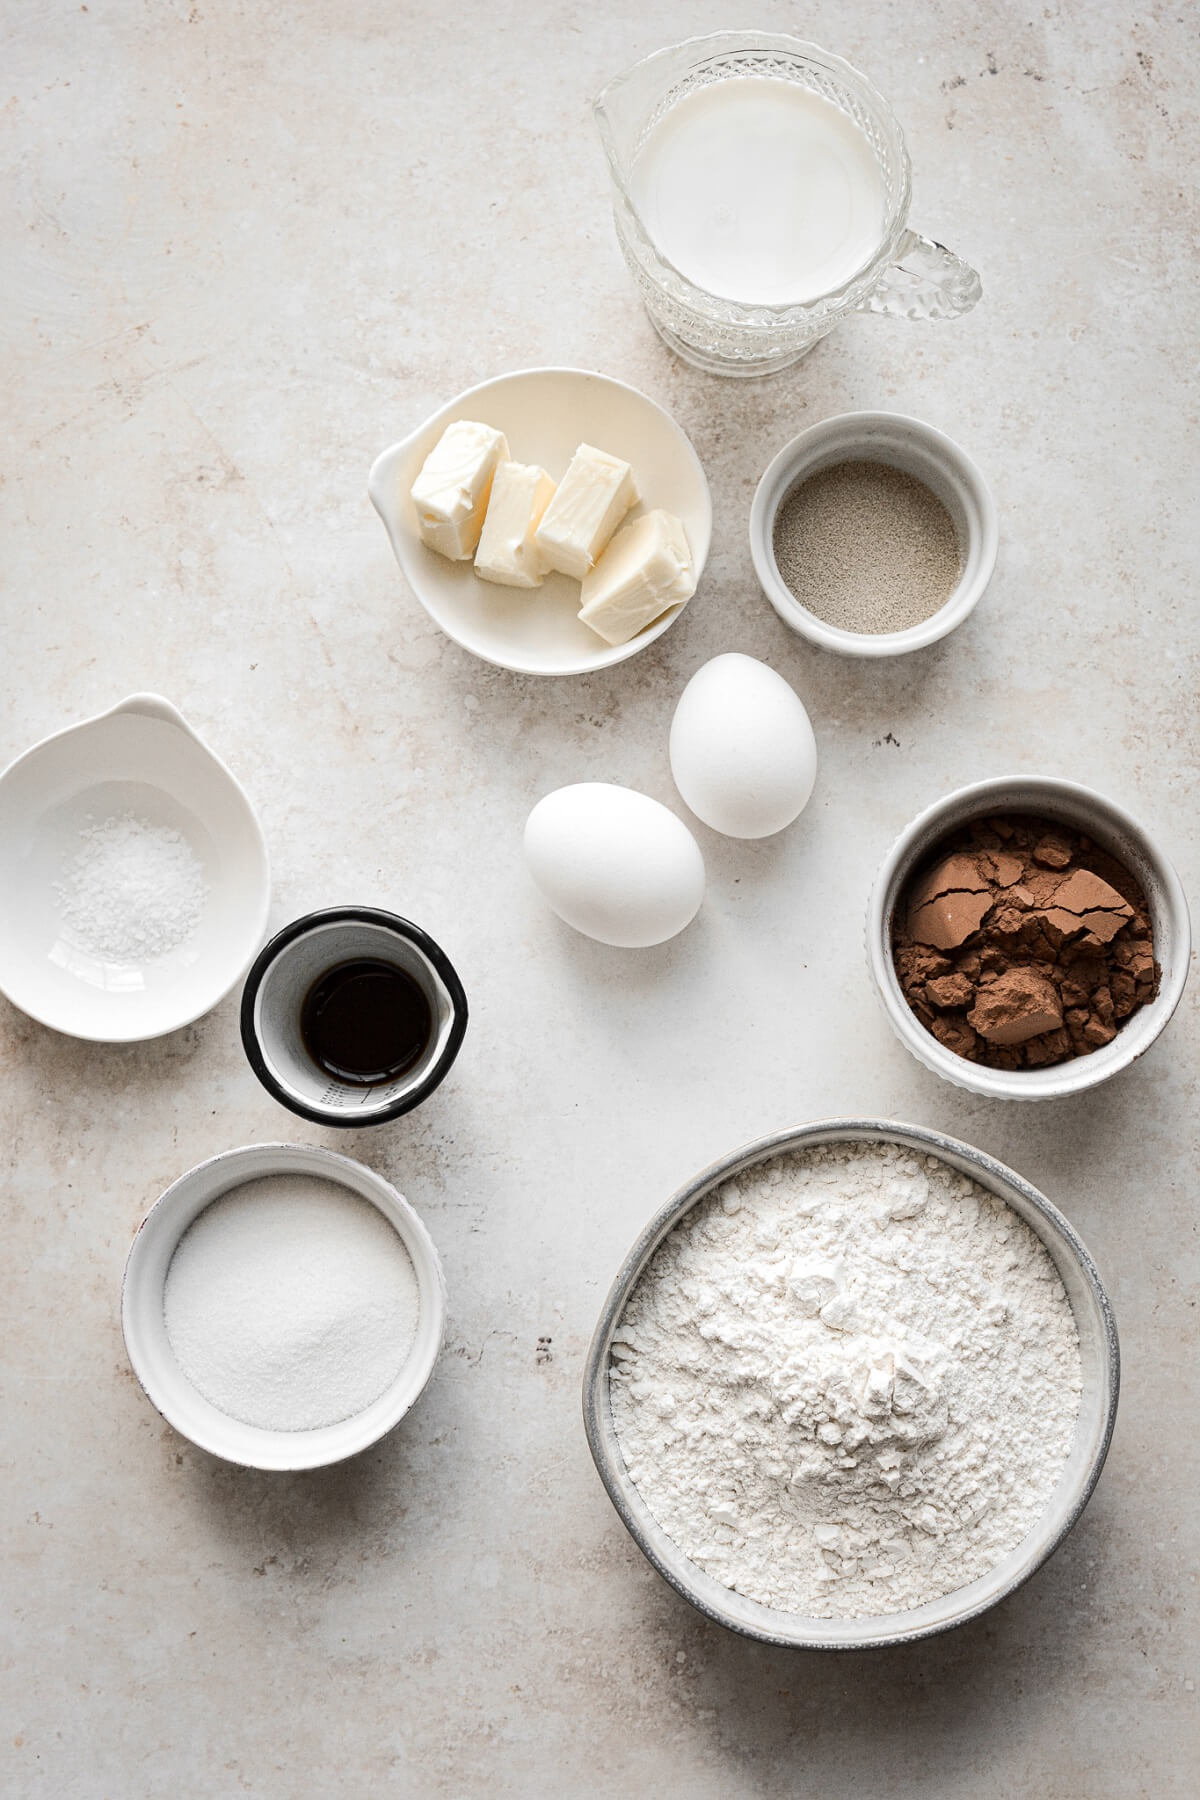 Ingredients for making chocolate cinnamon roll dough.